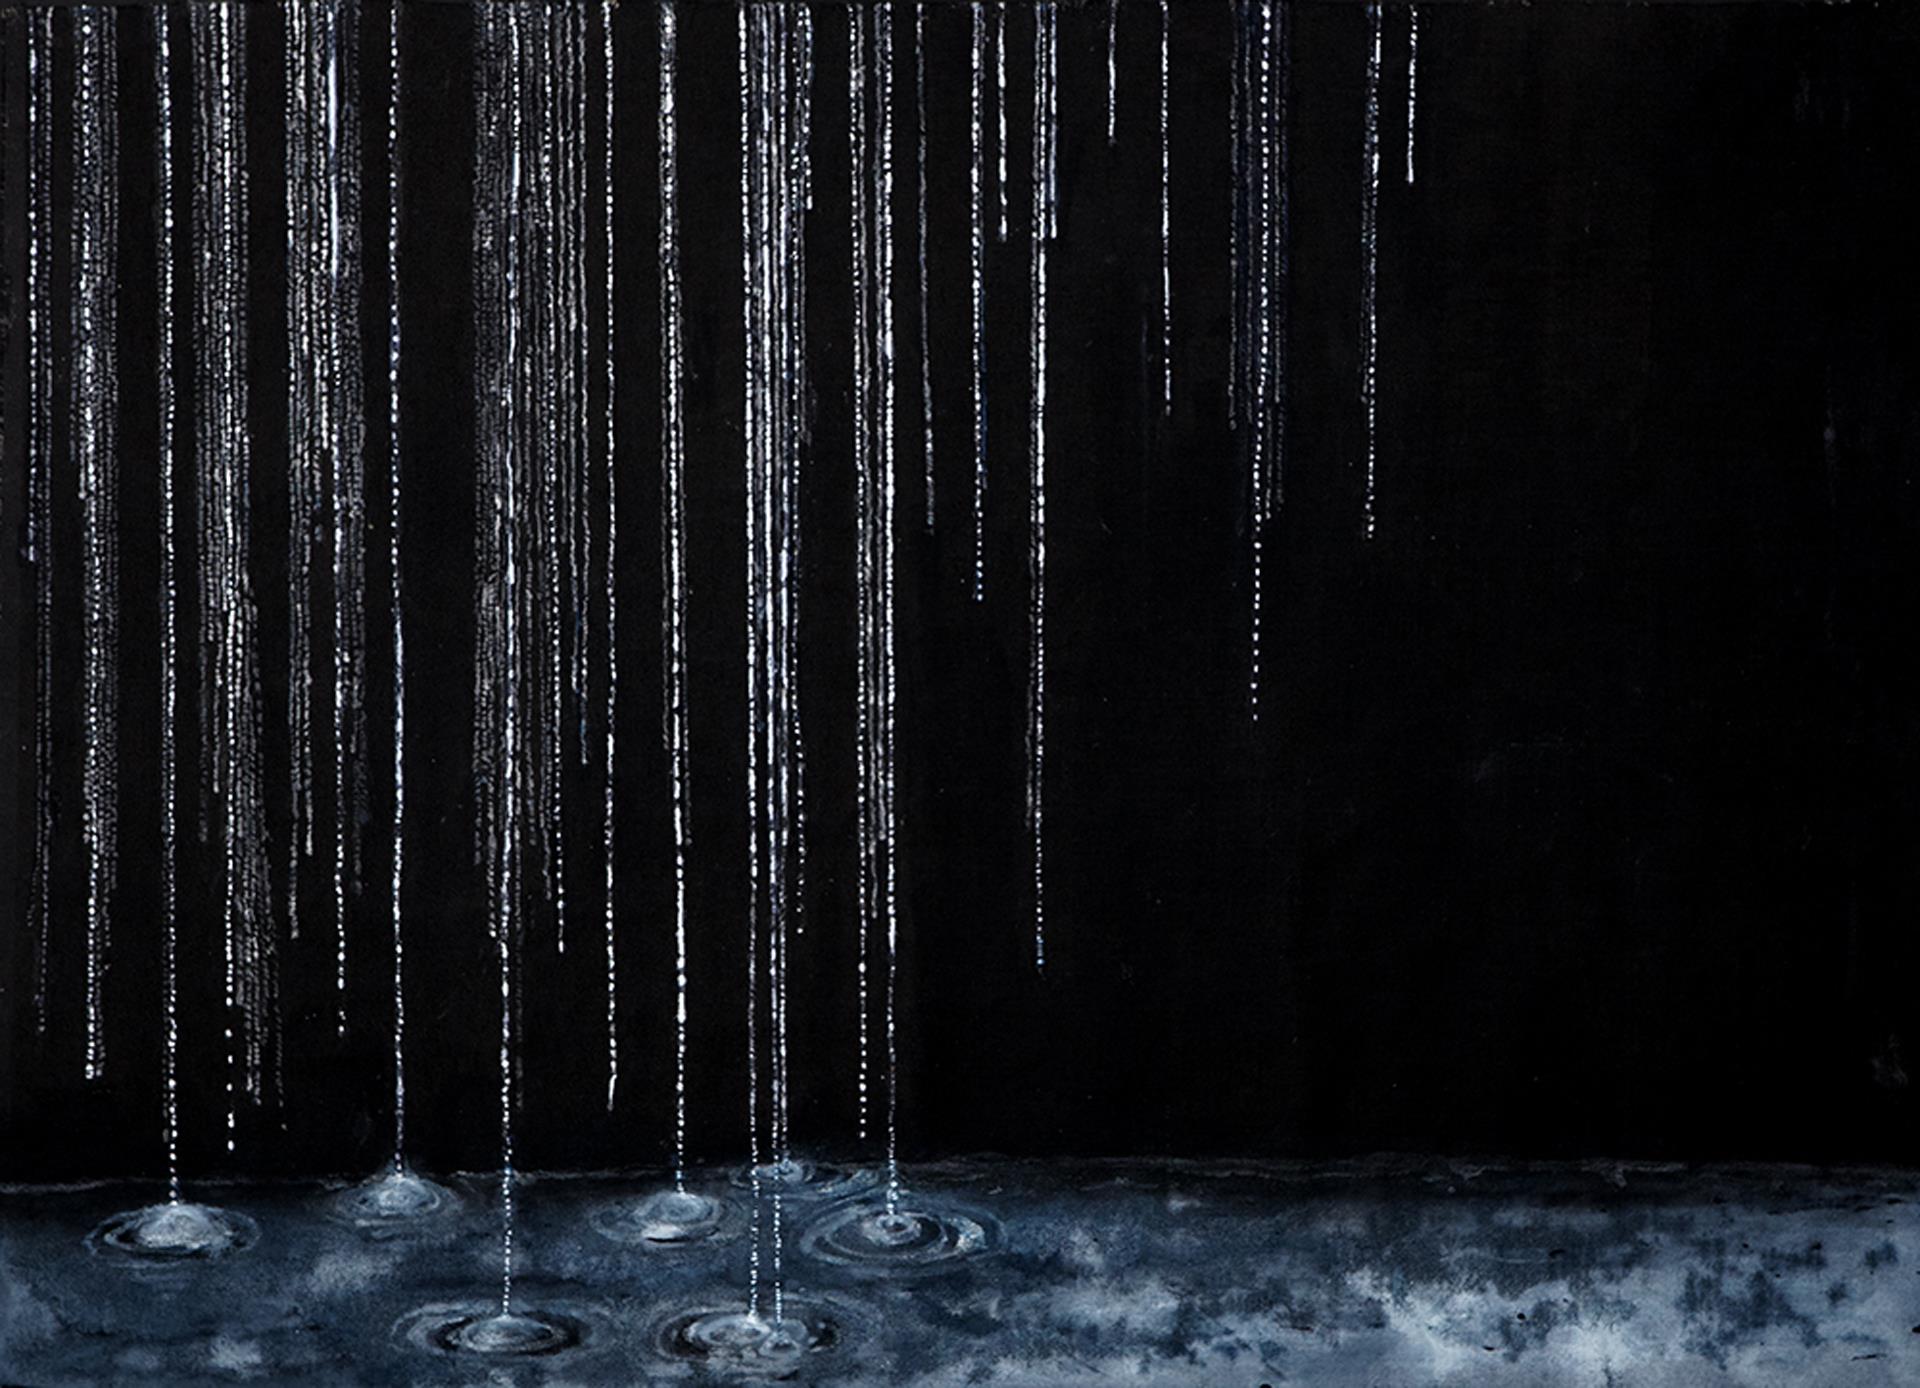 HONORABLE MENTION Pam Douglas "A Memory Of Rain" Inks, Acrylic on Raw Linen 32x43 $1600